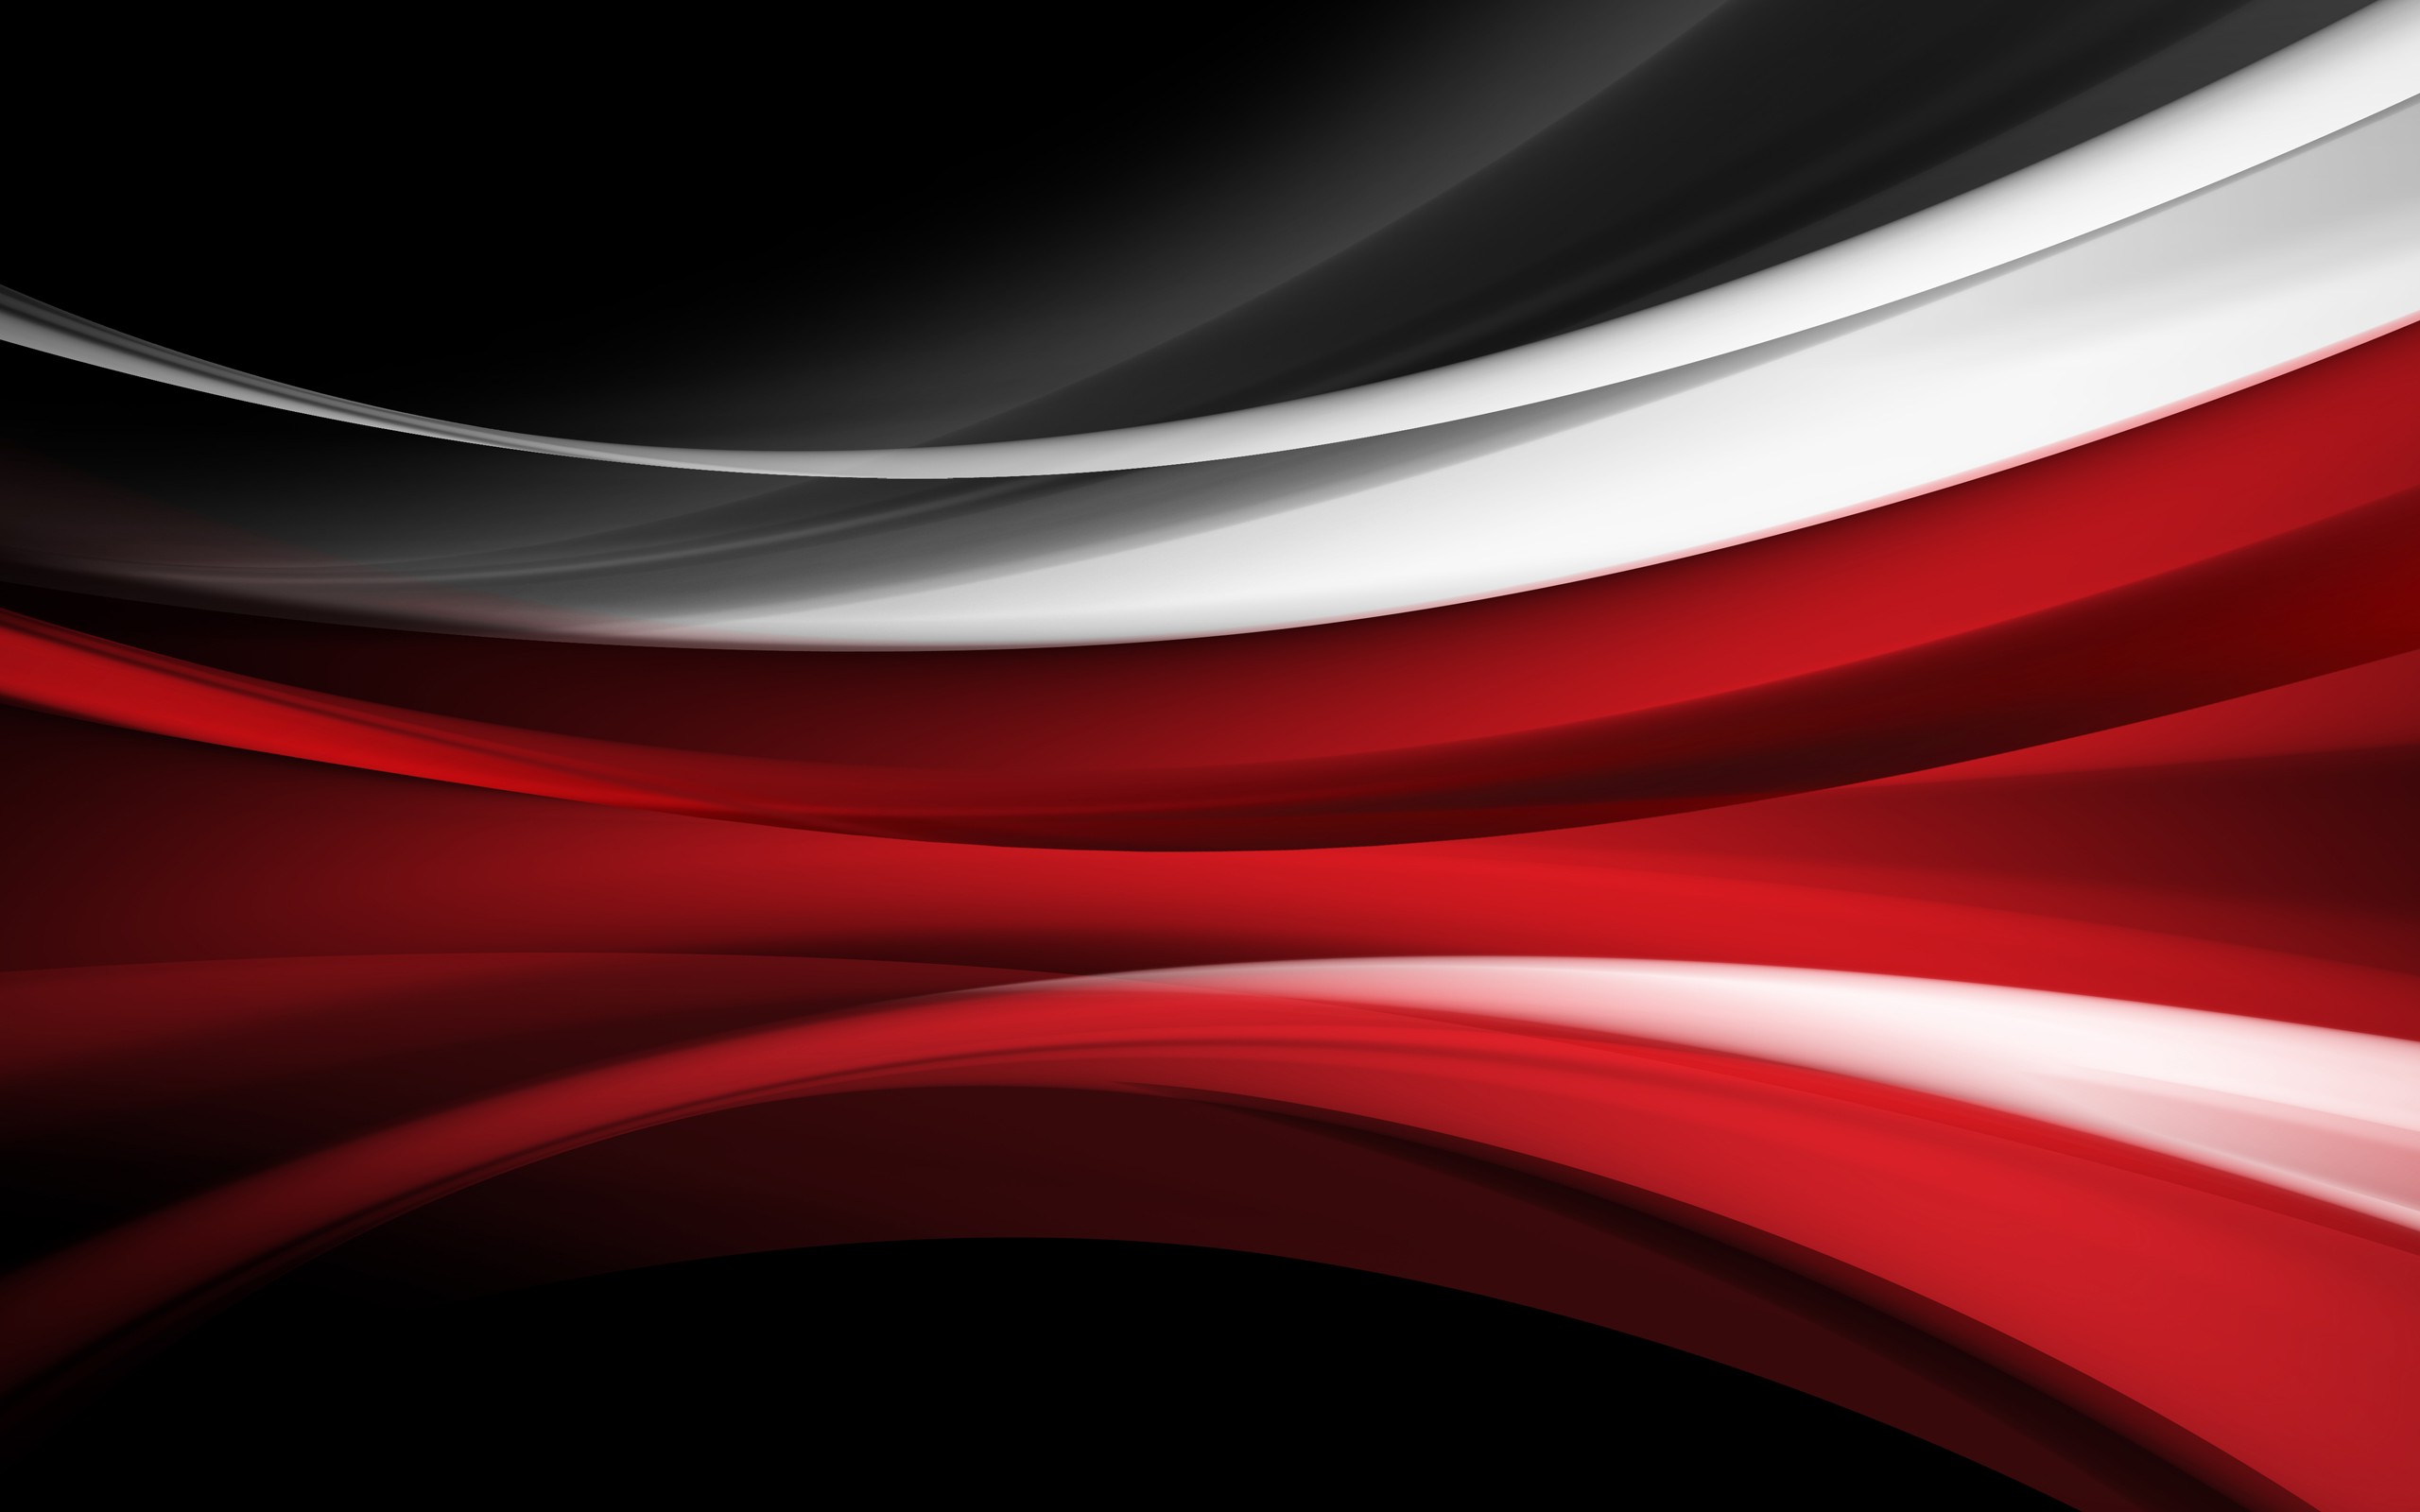 Red Vector Background Hd Png Lwytm Eqvpm